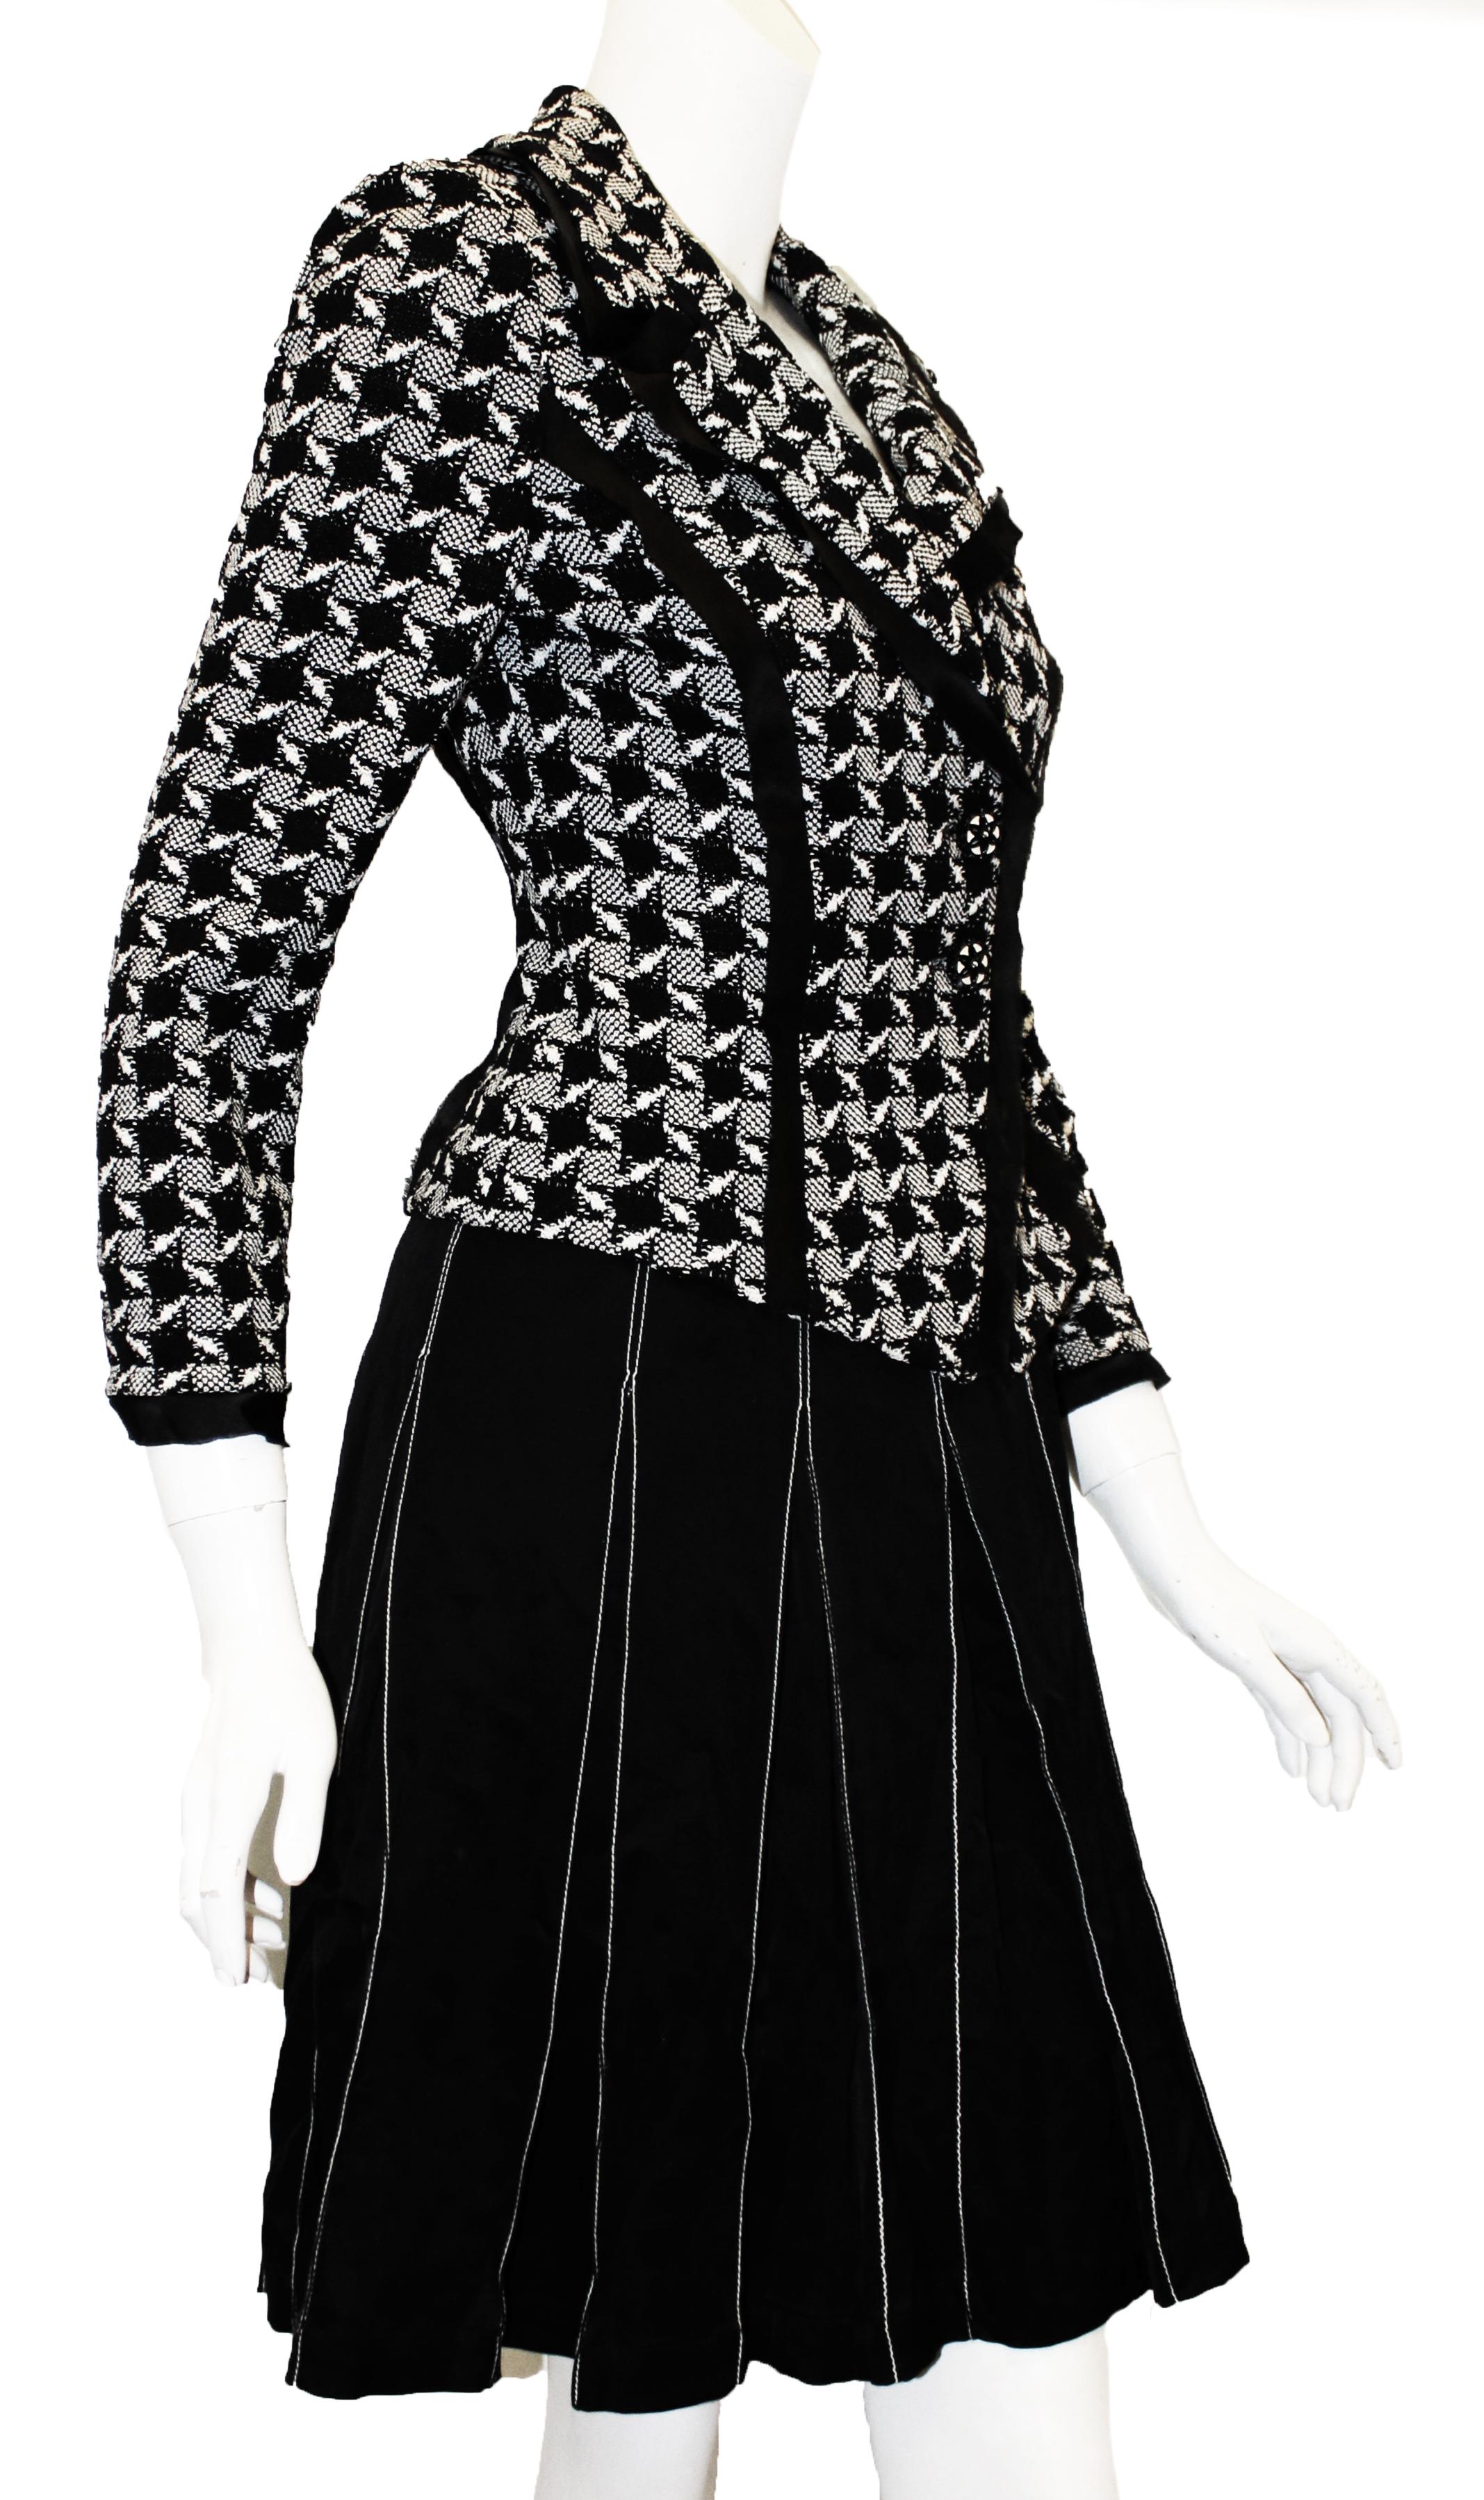 St. John black and white pleated skirt suit is lined in black silk.  The skirt includes top stitching in contrasting white thread from waist to hem.  The knit jacket's design is checkerboard allover and is trimmed with frayed black silk around the